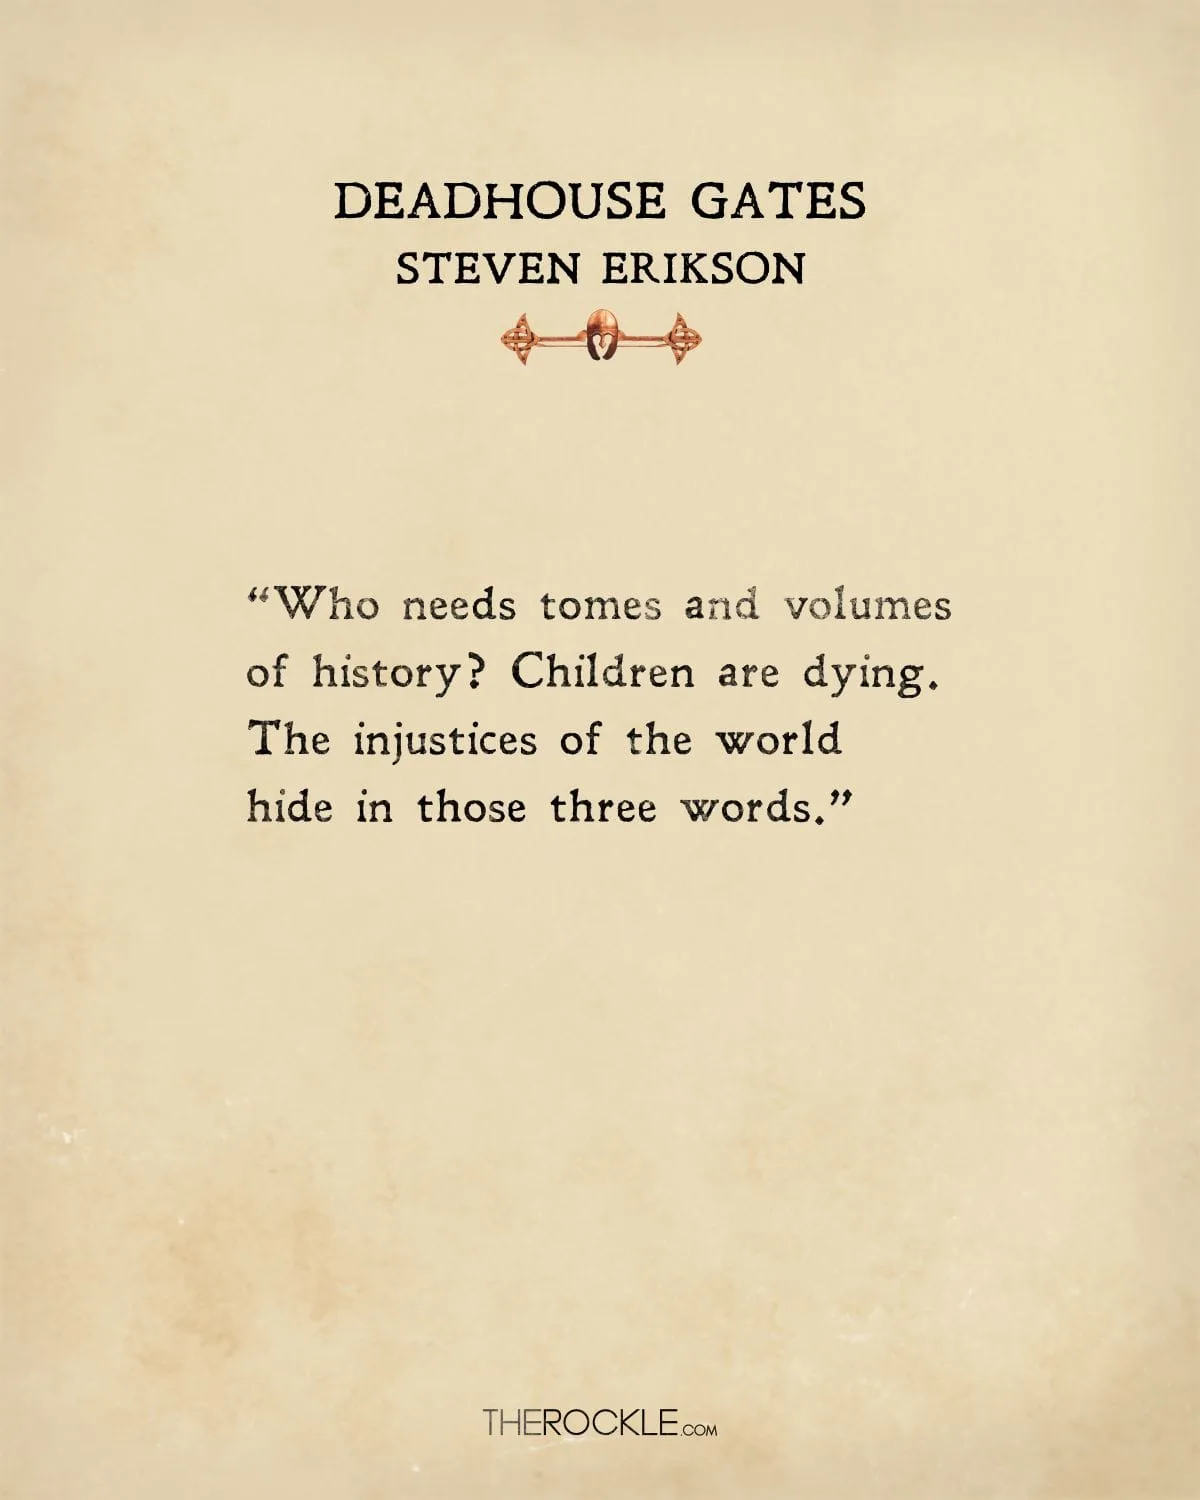 Steven Erikson quote from Deadhouse Gates